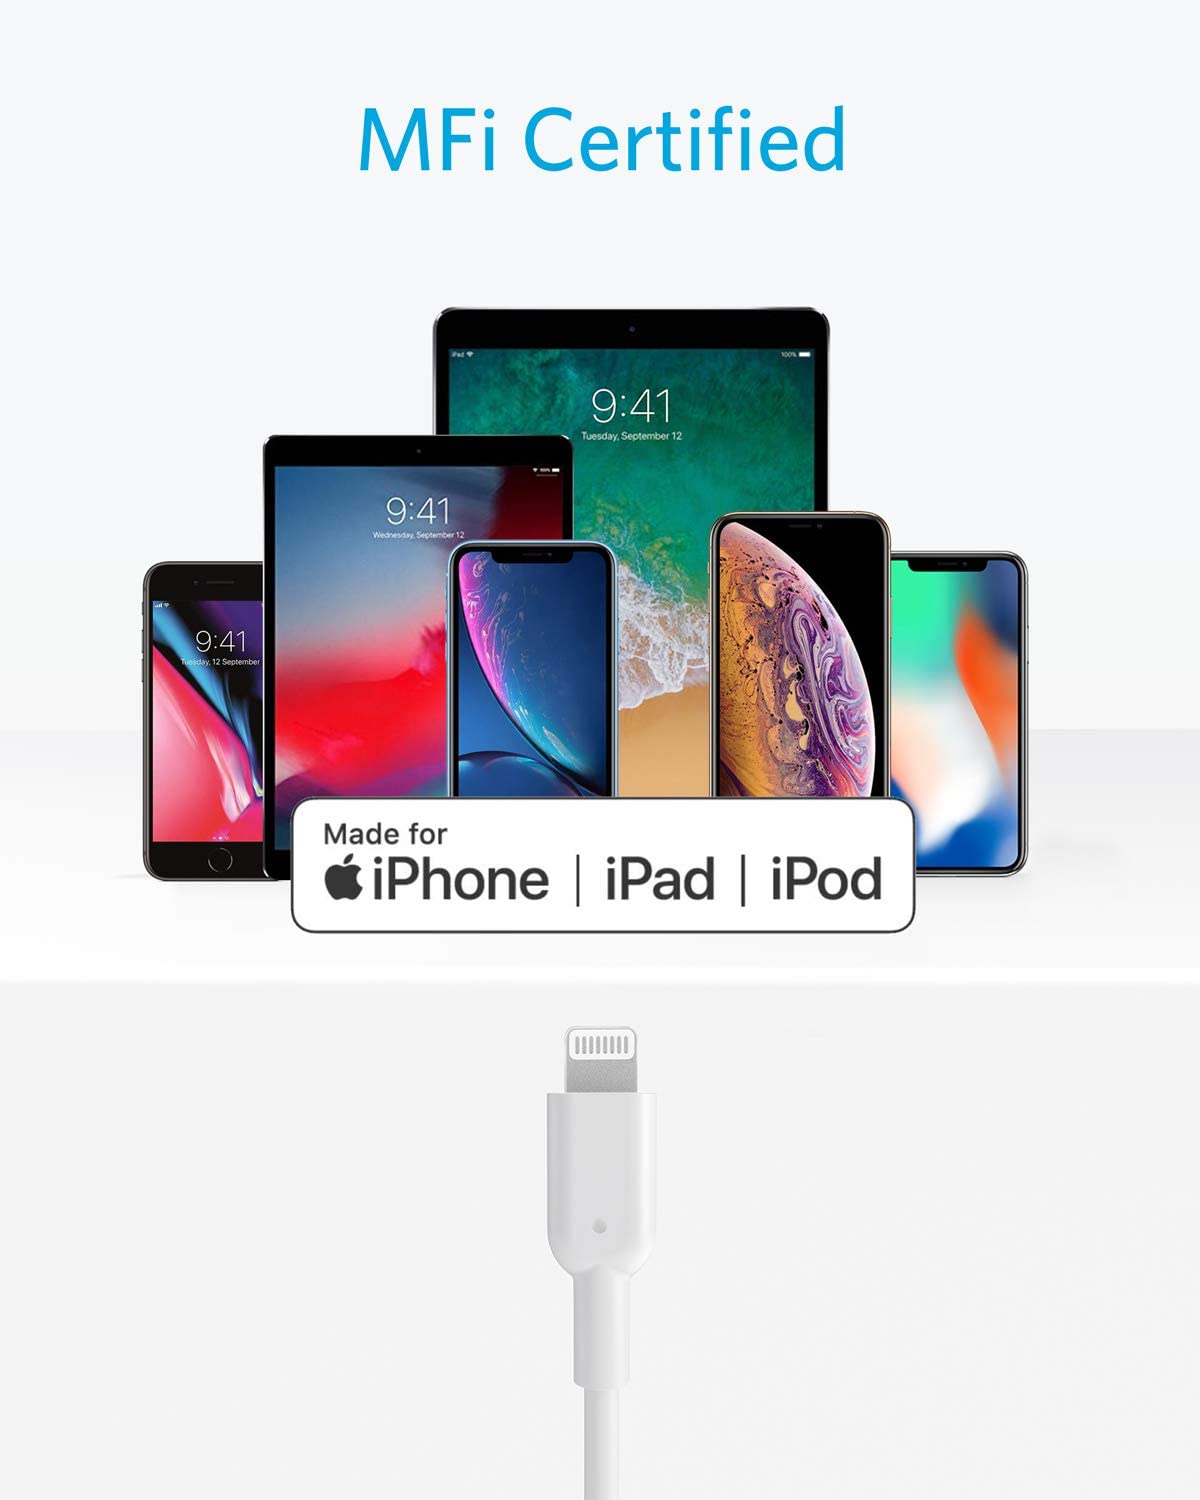  4Pack USB C to Lightning Cable 6ft,(Apple MFi Certified) Type C  to Lightning Cord 2M,Apple USB C Lightning Cable Super Fast Charger for  iPhone 14/14 Pro 13/13 Pro/12/12 Mini/12 Pro Max/11